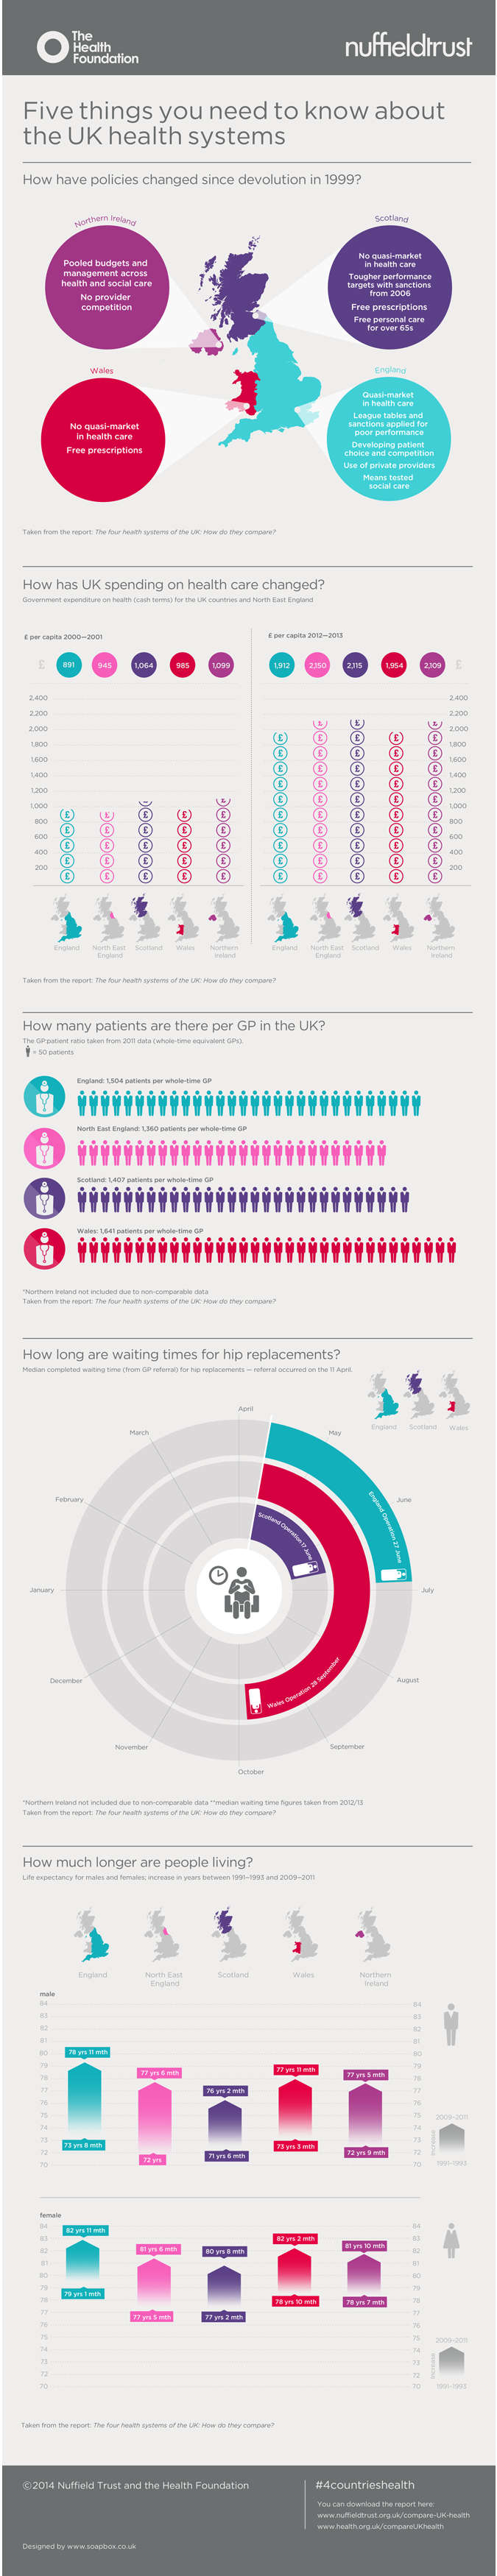 infographic on UK health system